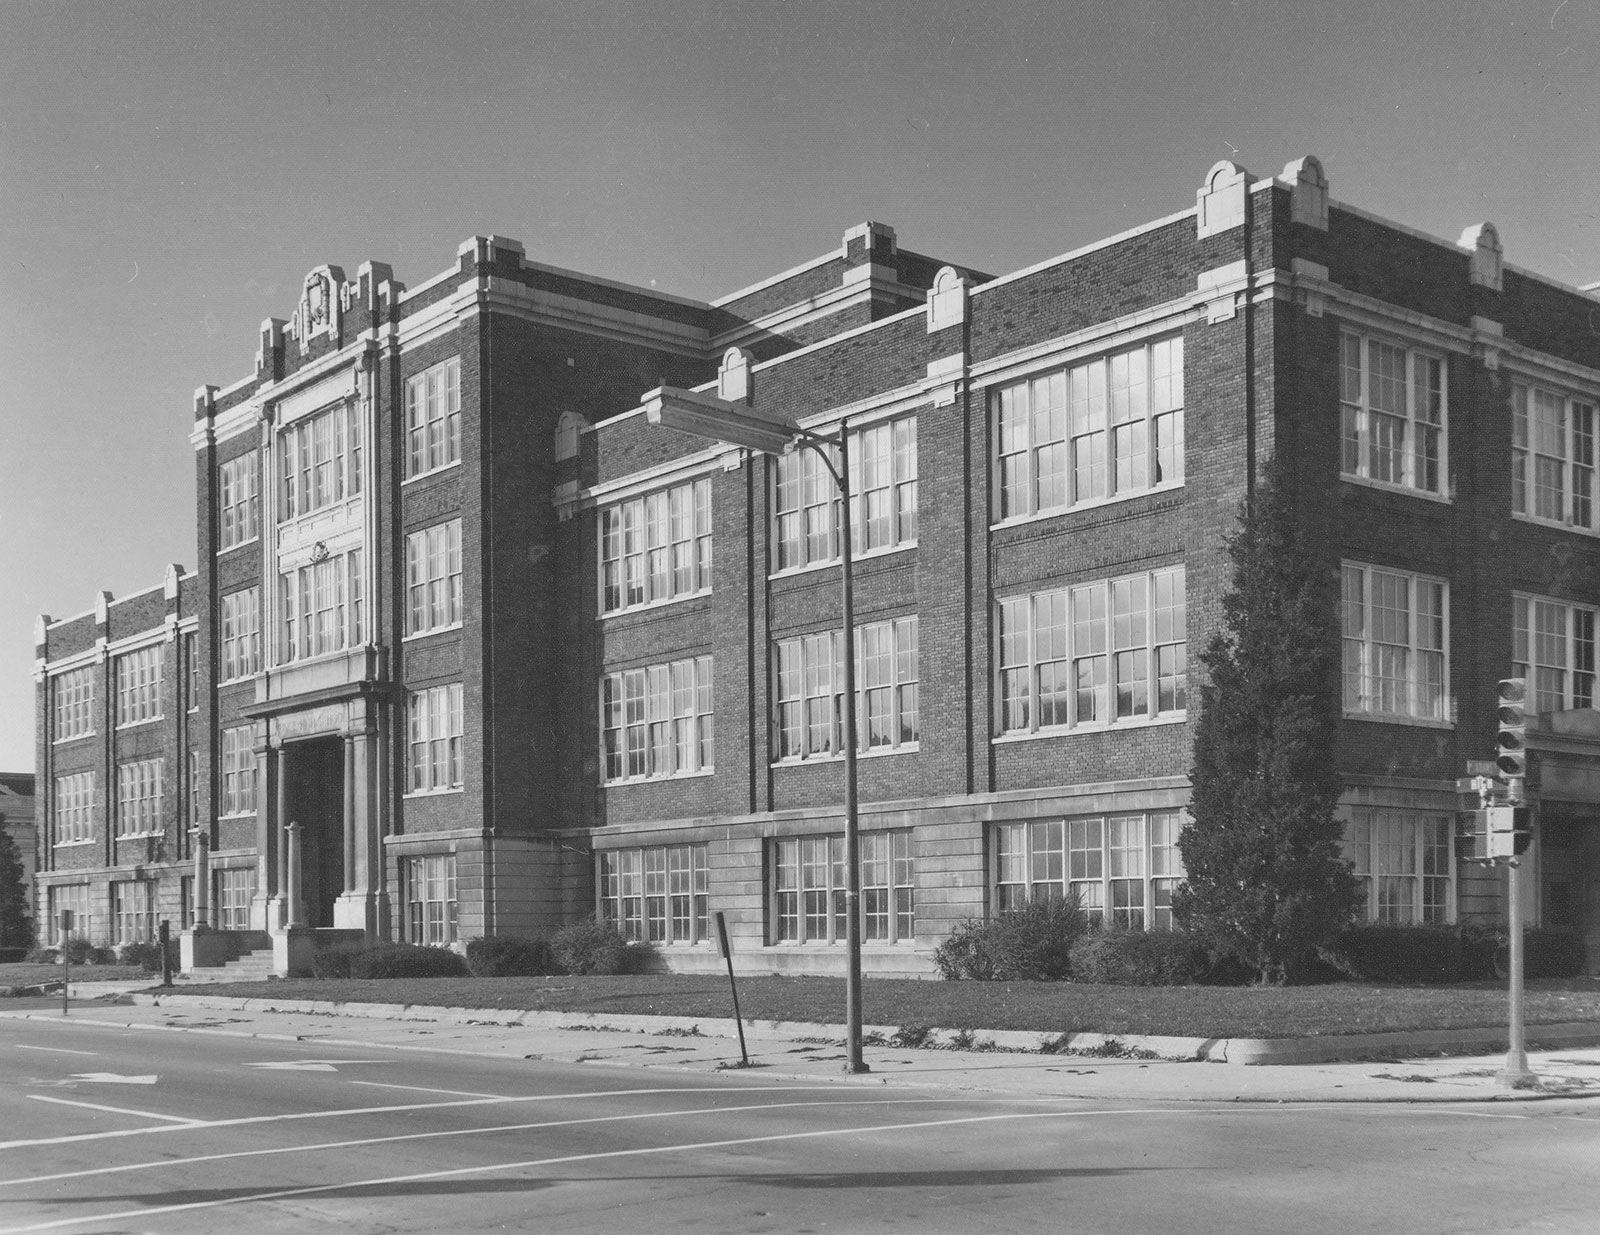 Muncie Central High School in the 1970s.